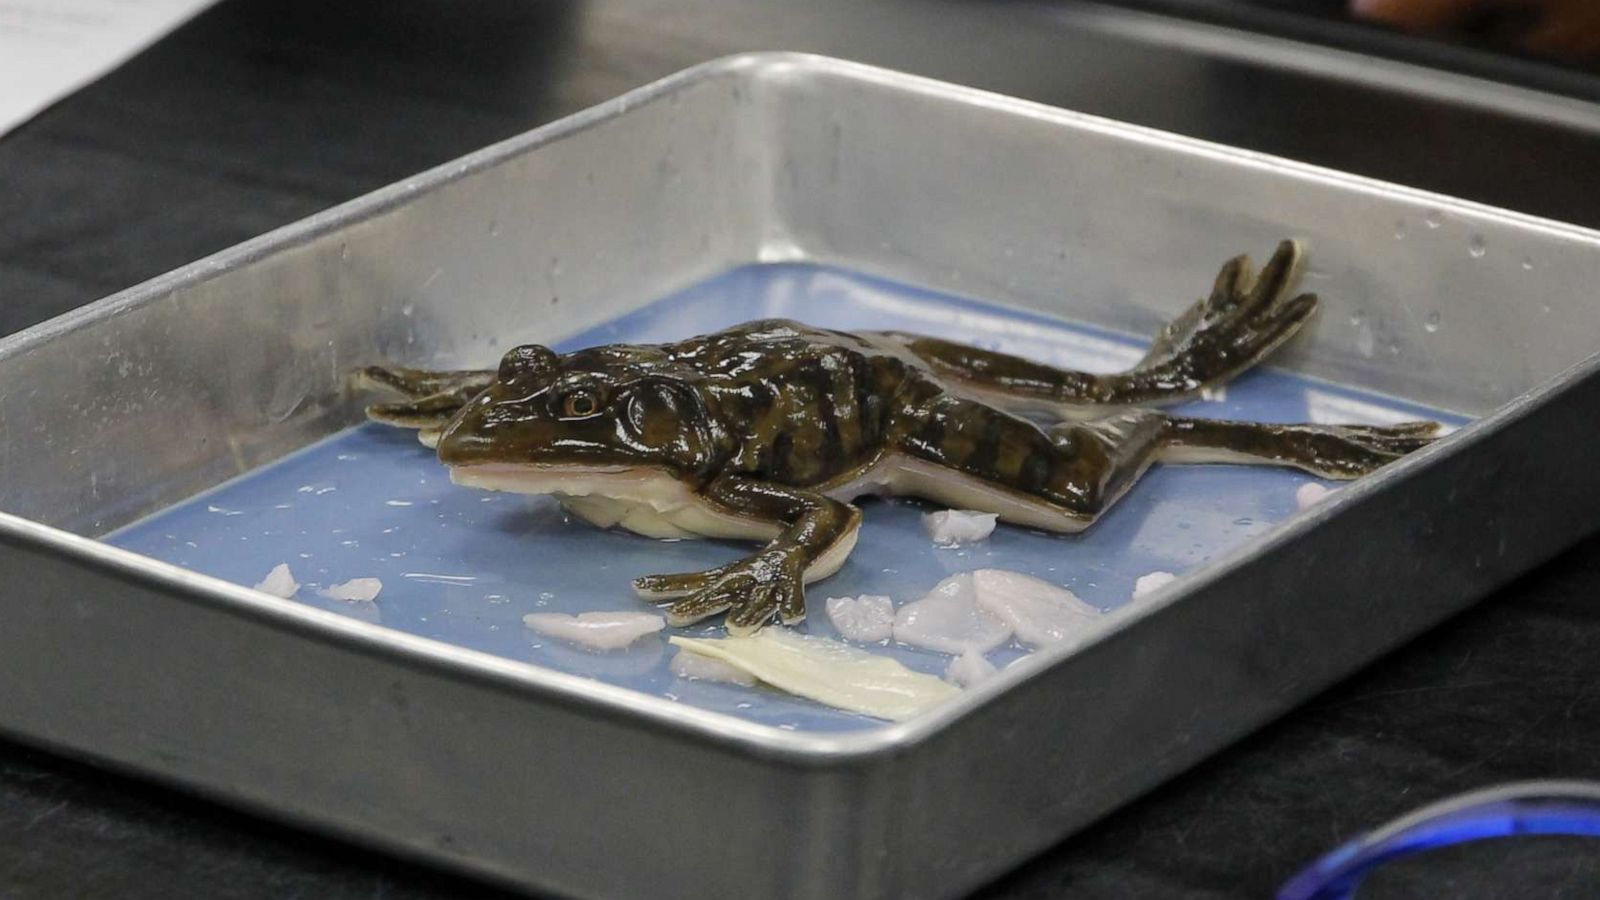 Florida high school unveils synthetic frogs for dissection in biology class  - ABC News